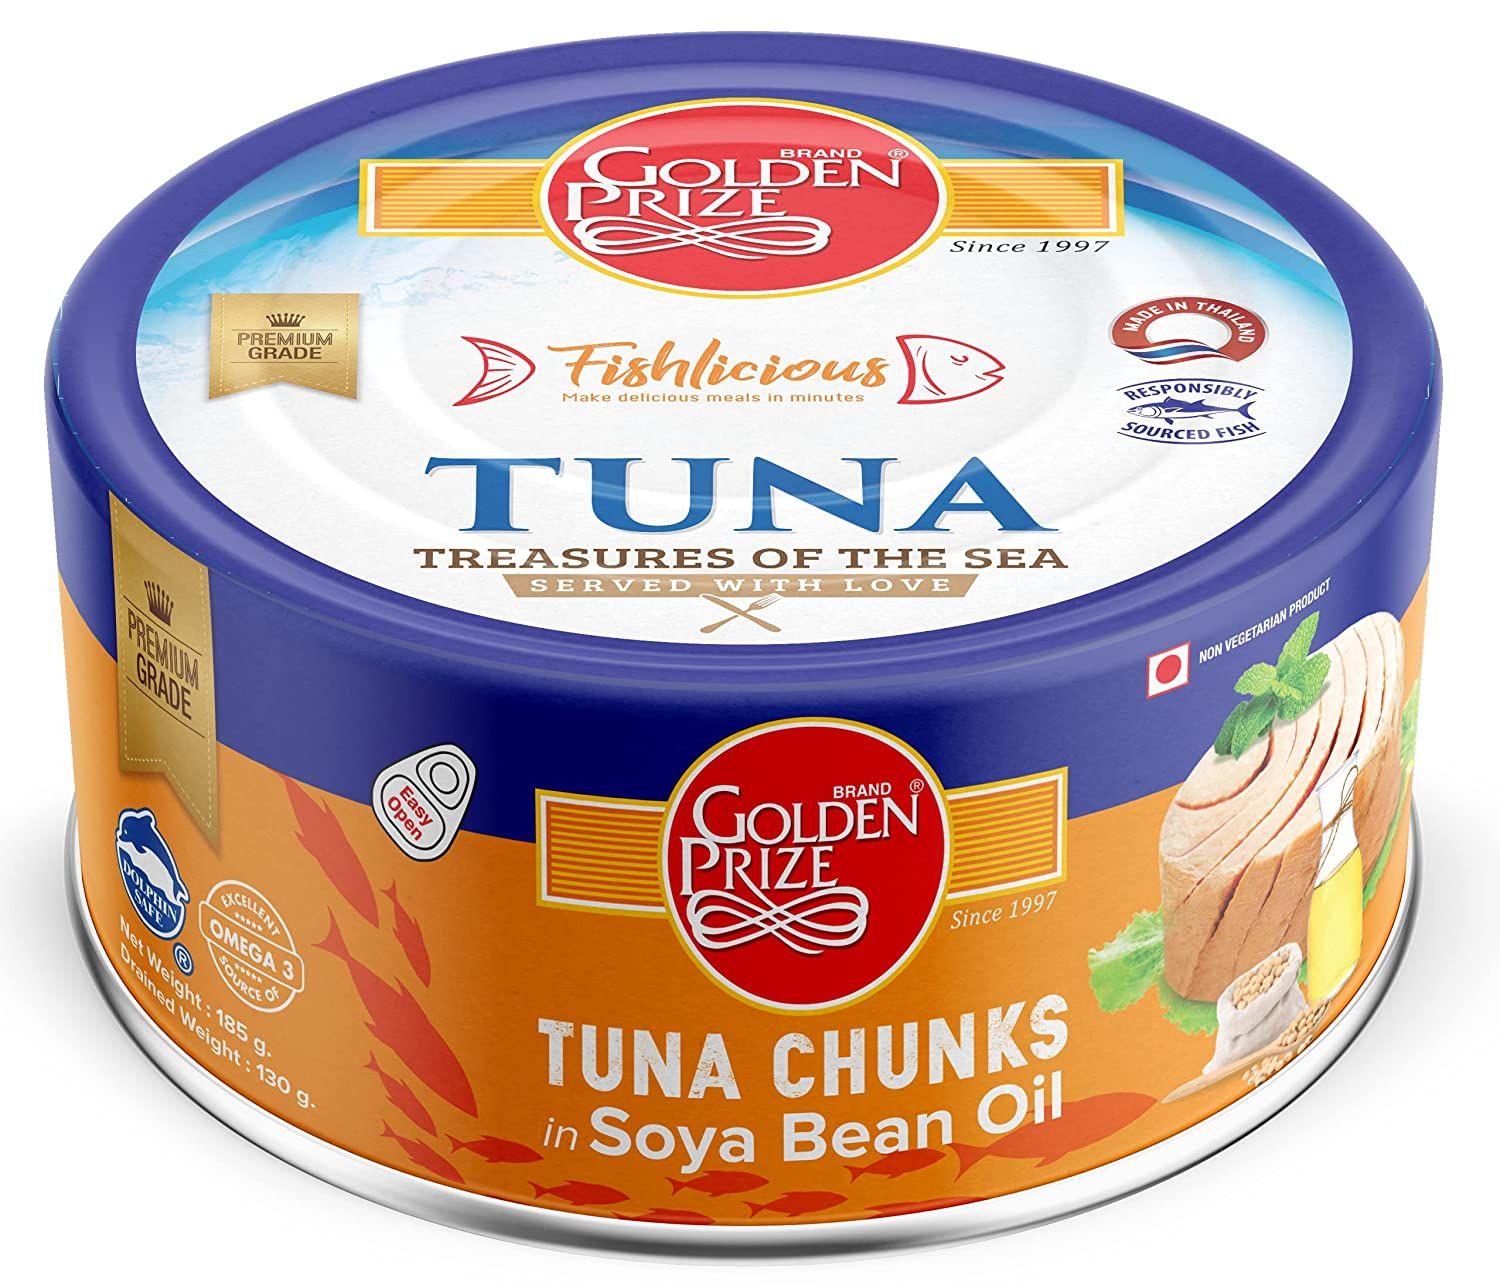 Golden Prize Tuna Chunks in Soyabean Oil Image